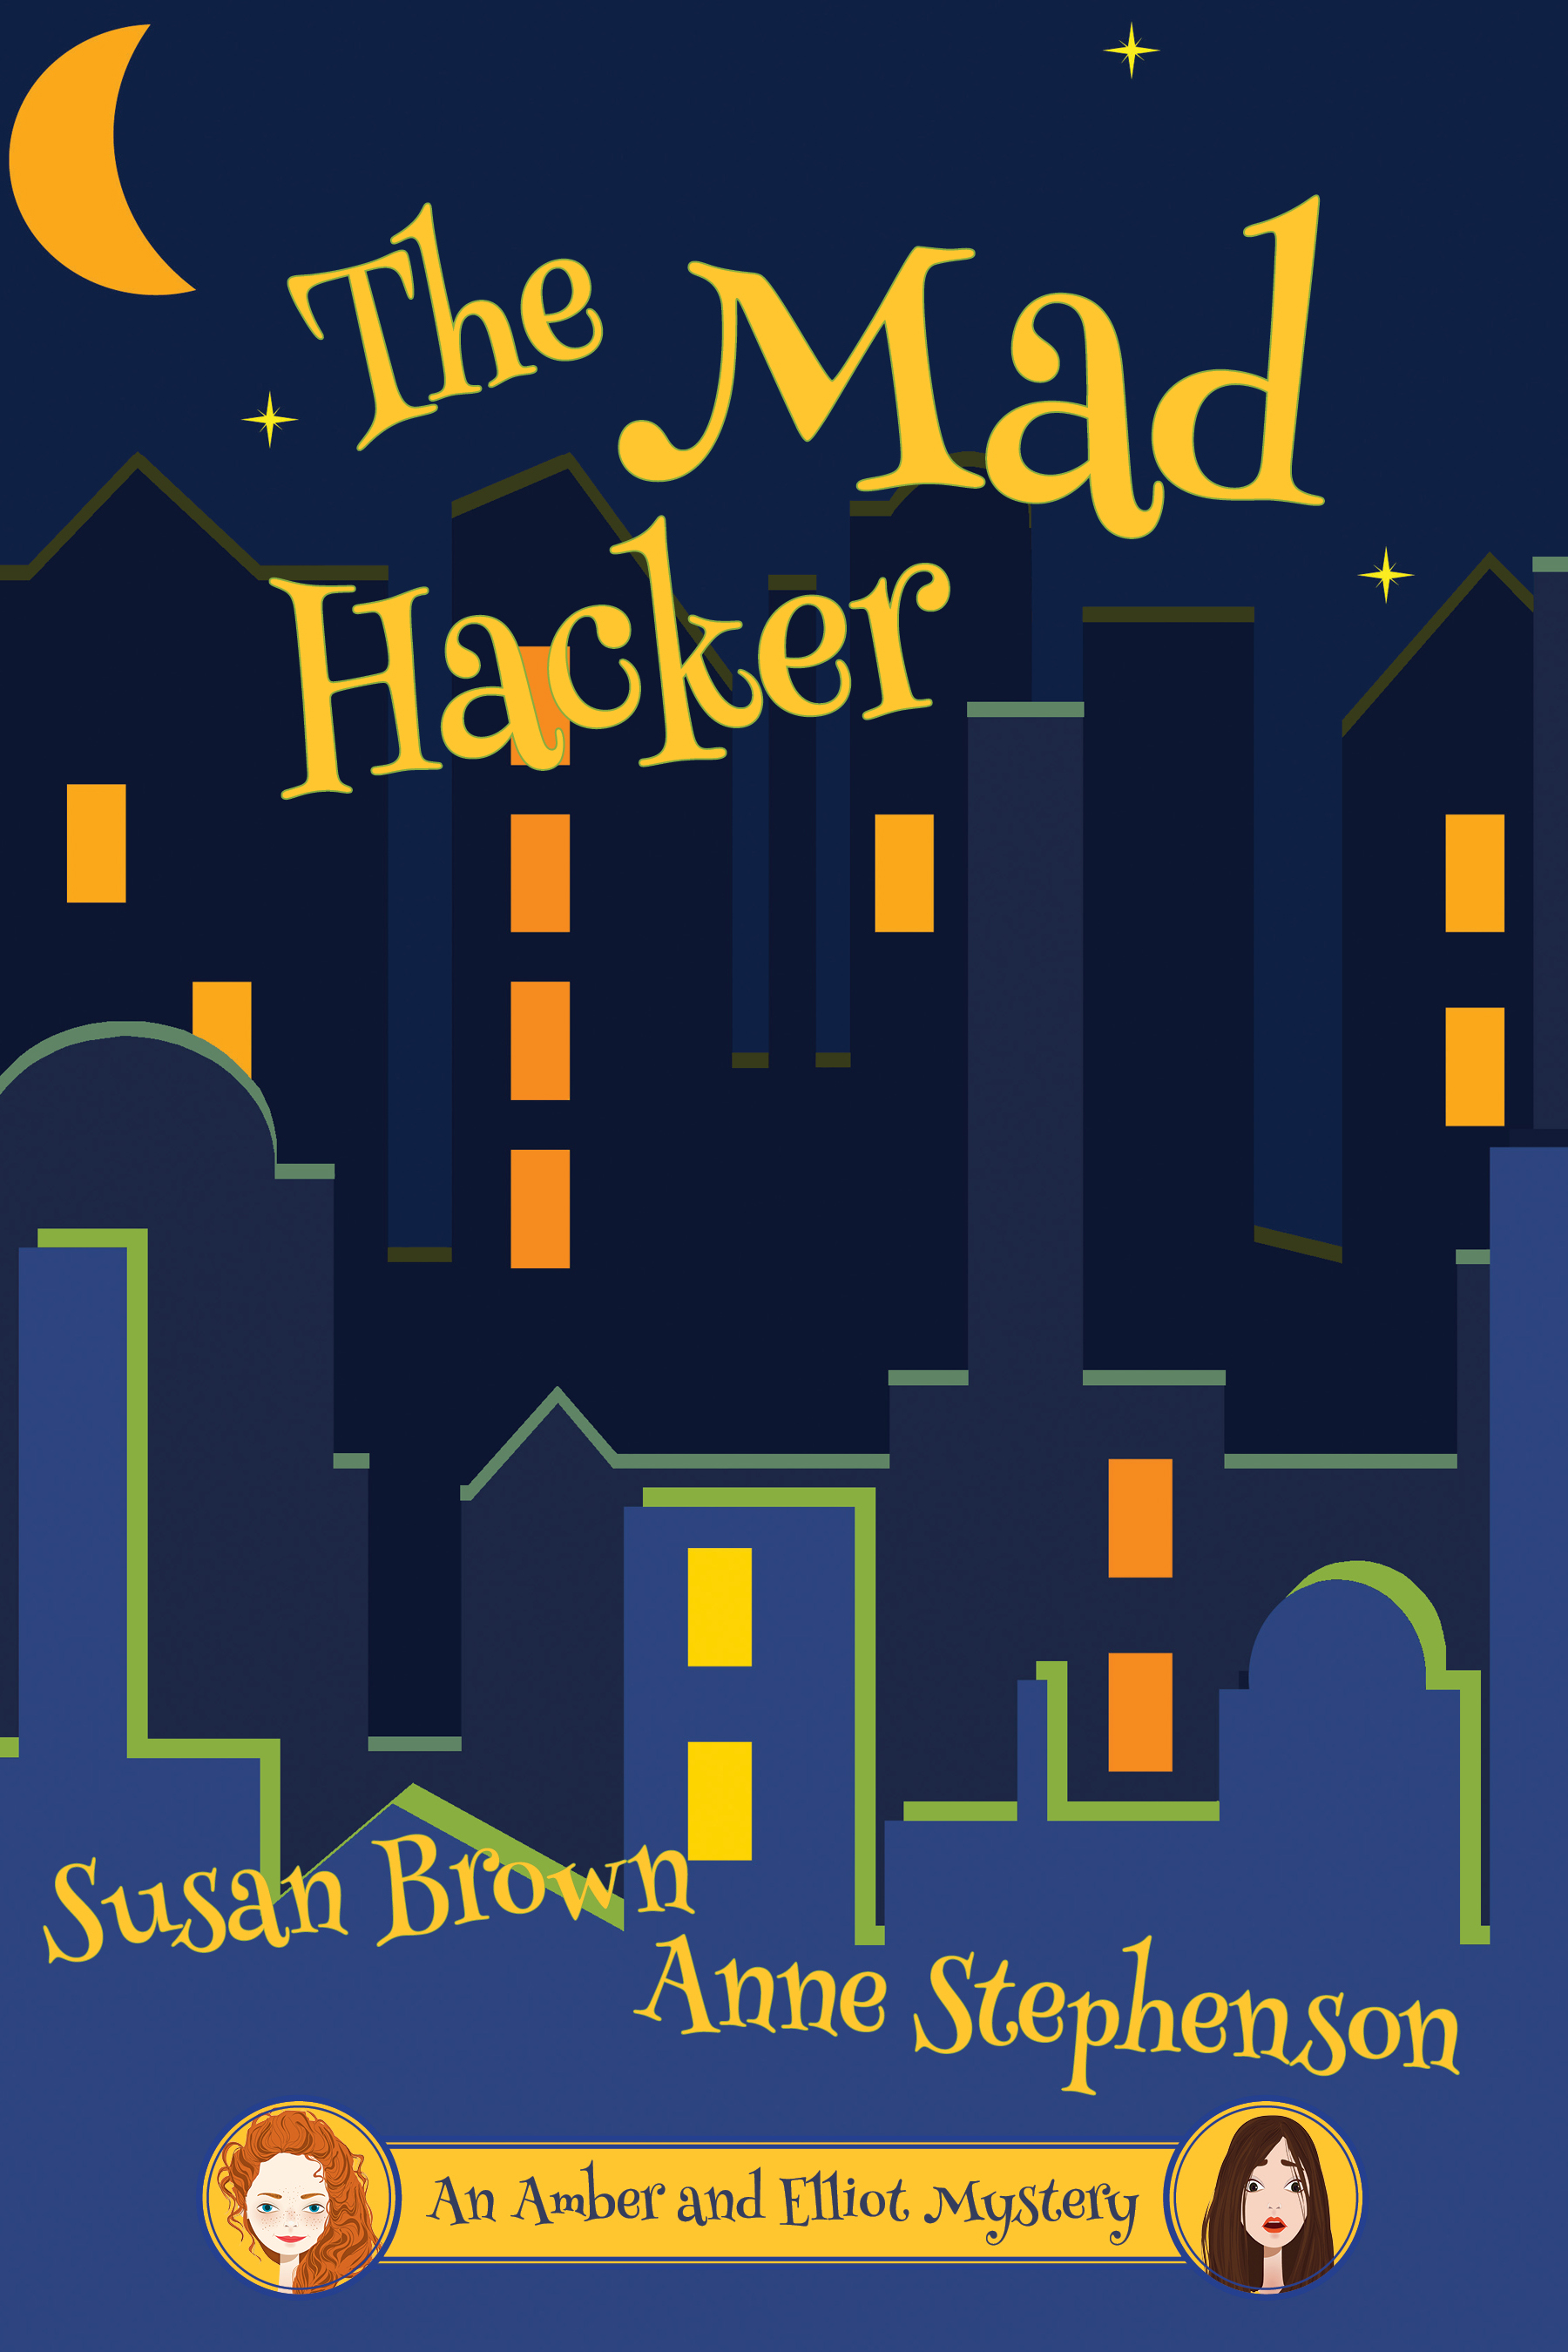 The Mad Hacker